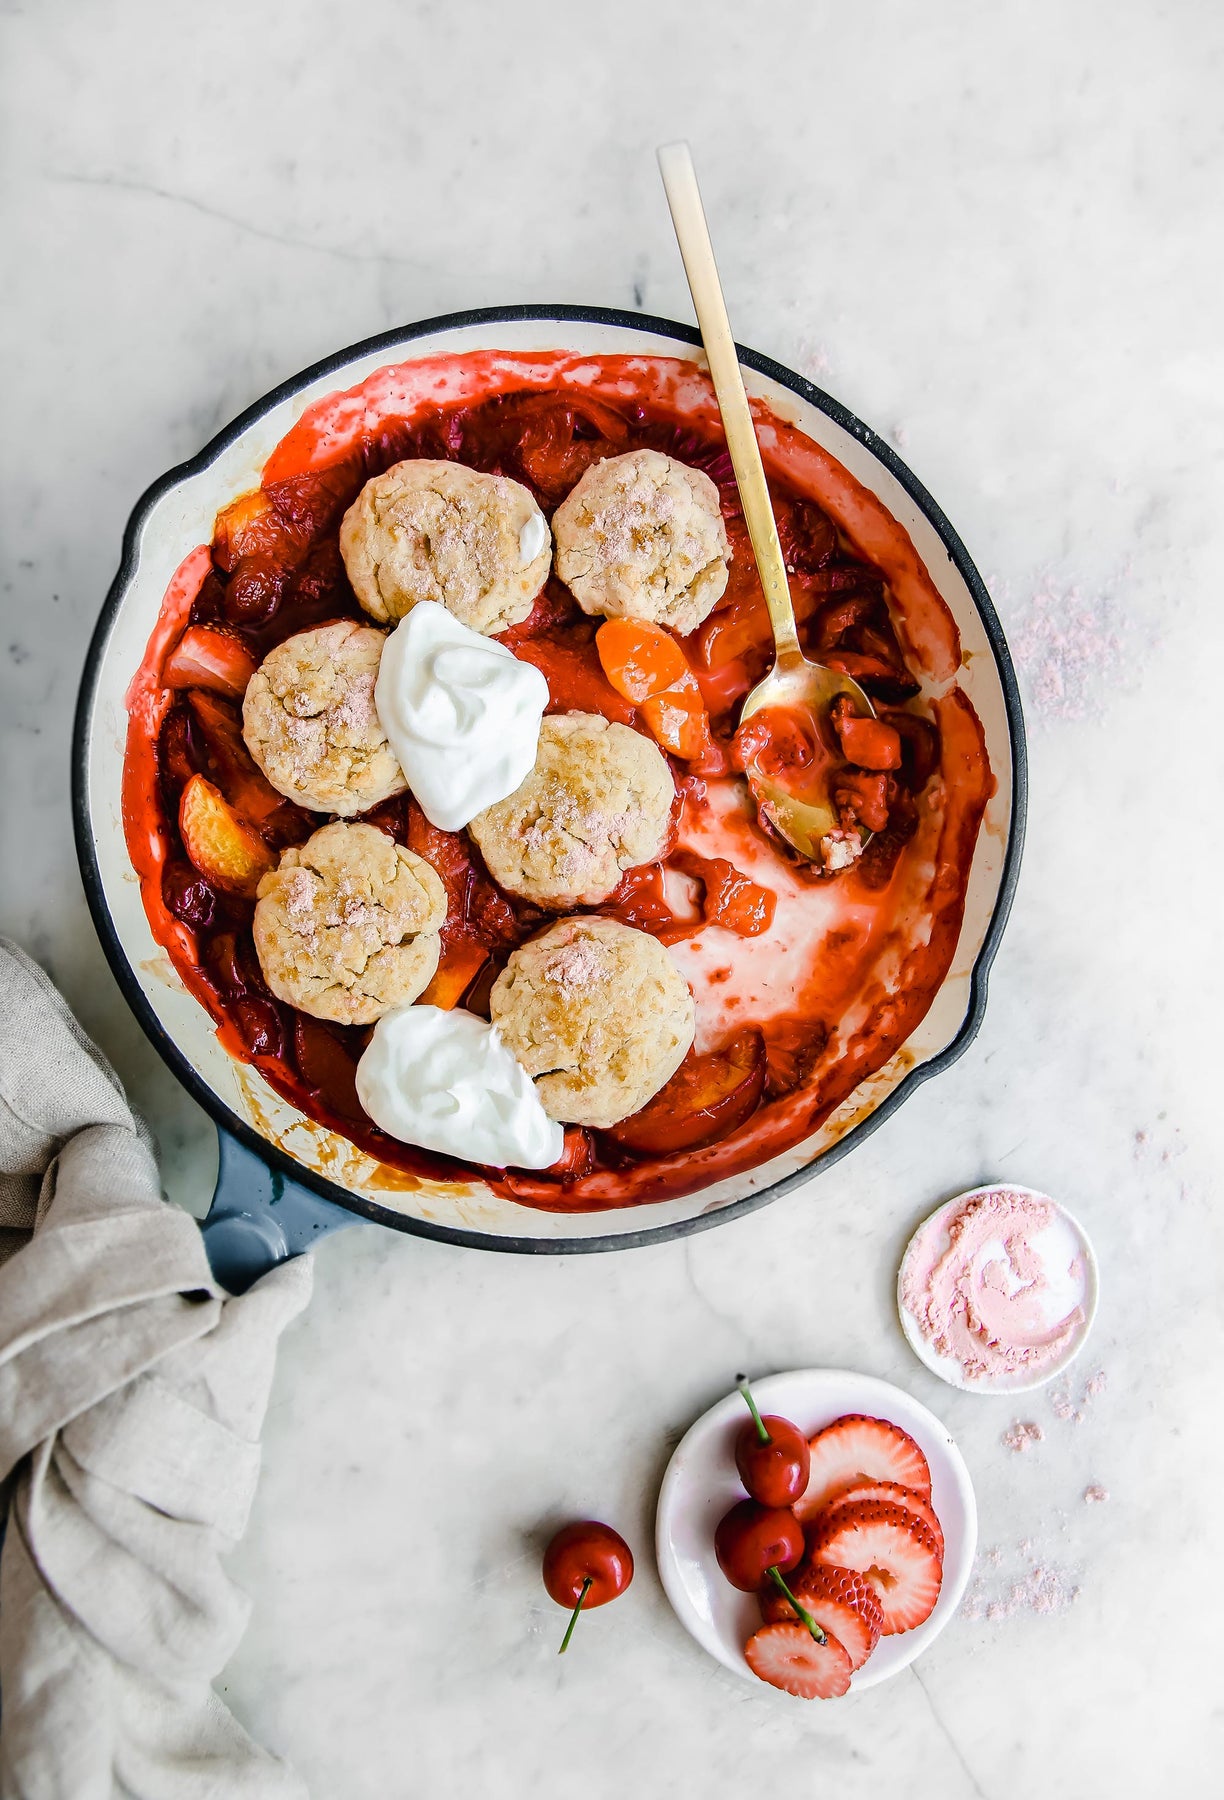 Summer Fruit Cobbler with Protein and Probiotics